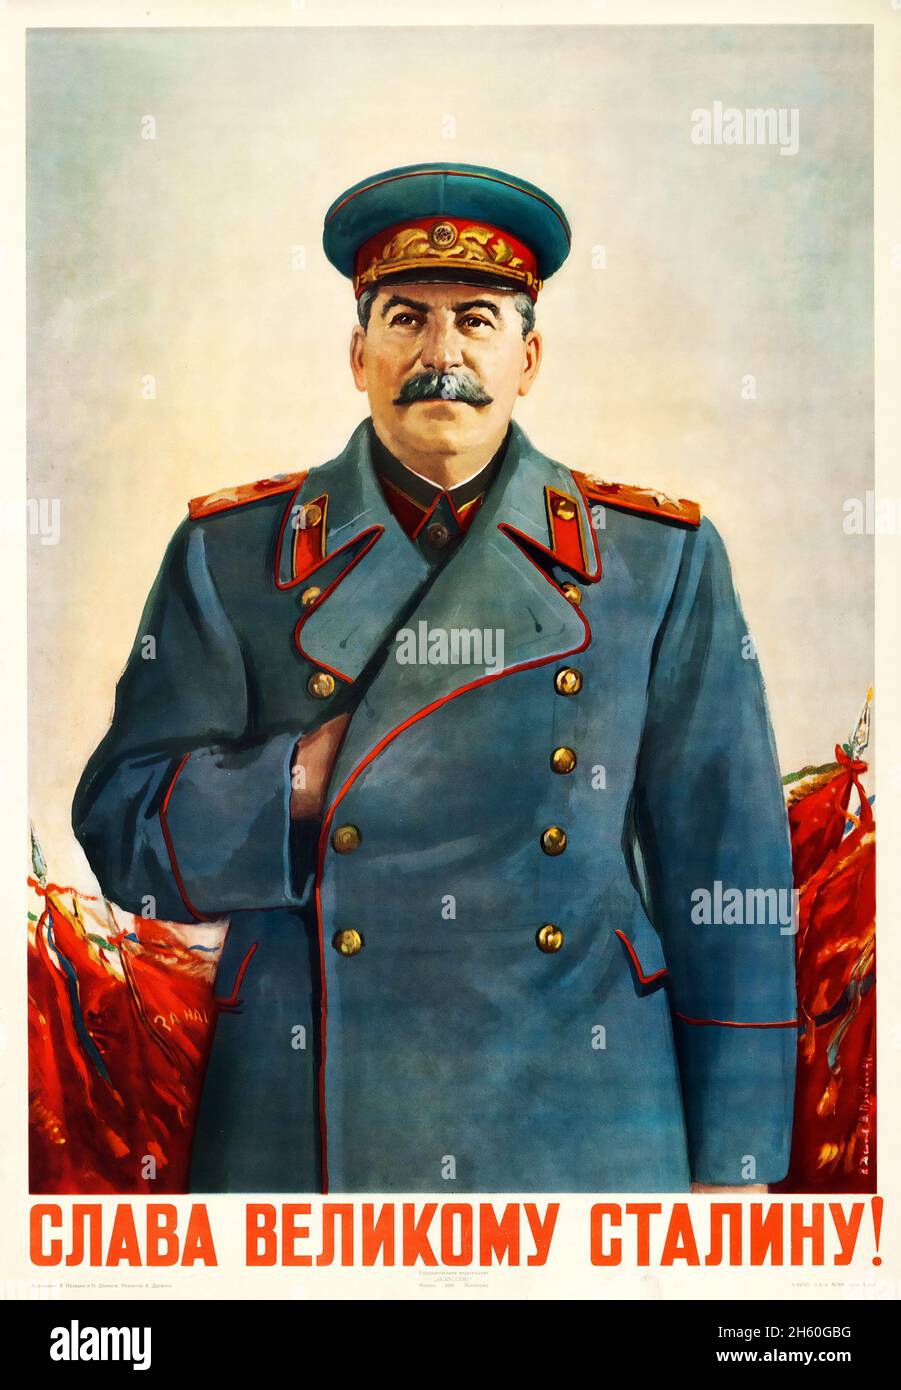 Glory to the Great Stalin (Moscow, 1948). Russian Propaganda Poster. Stock Photo